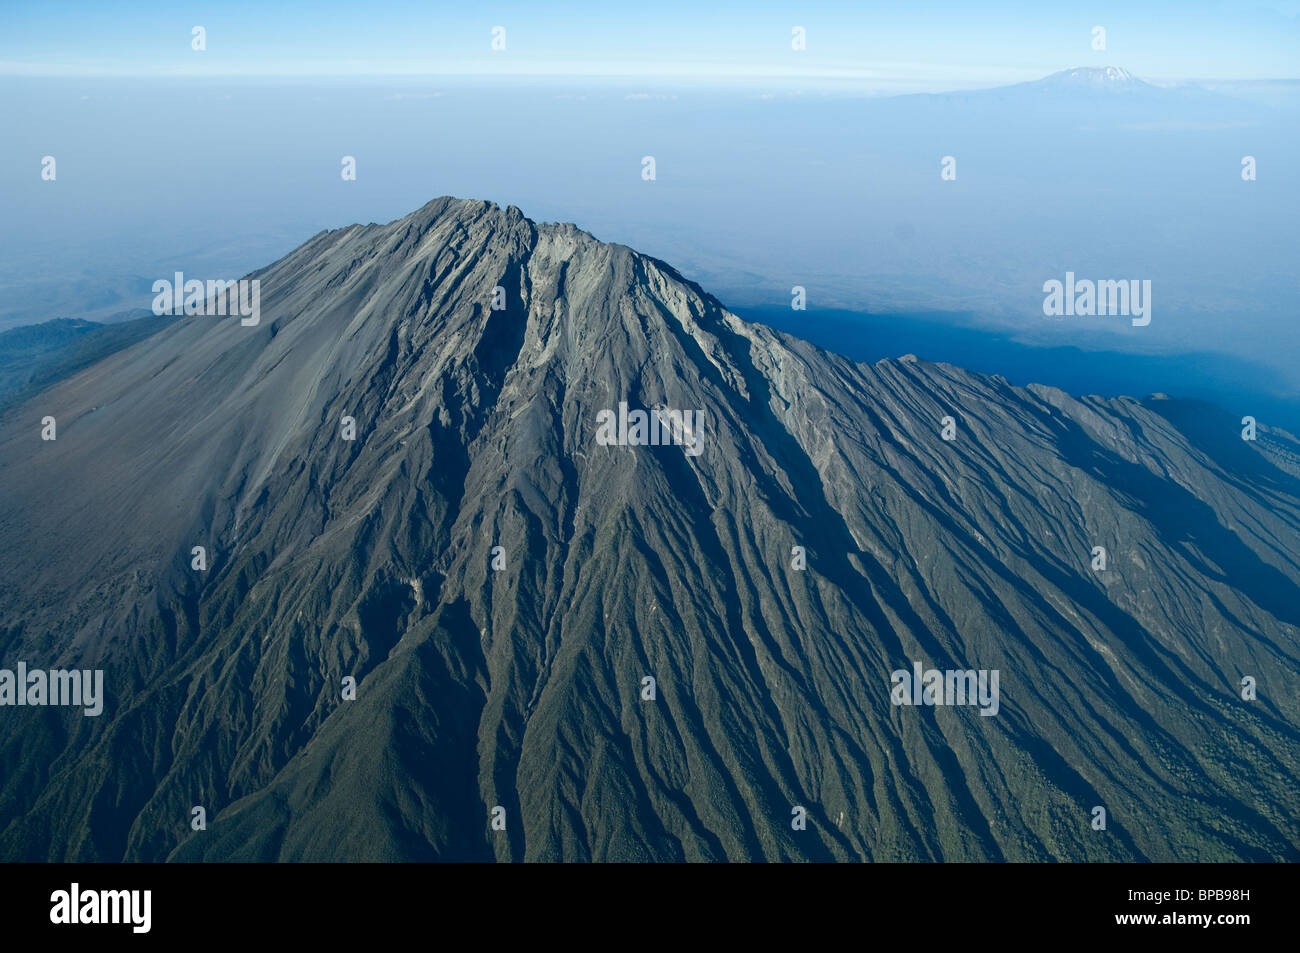 Aerial view of the volcano Mount Meru with Kilimanjari in the background Tanzania Stock Photo